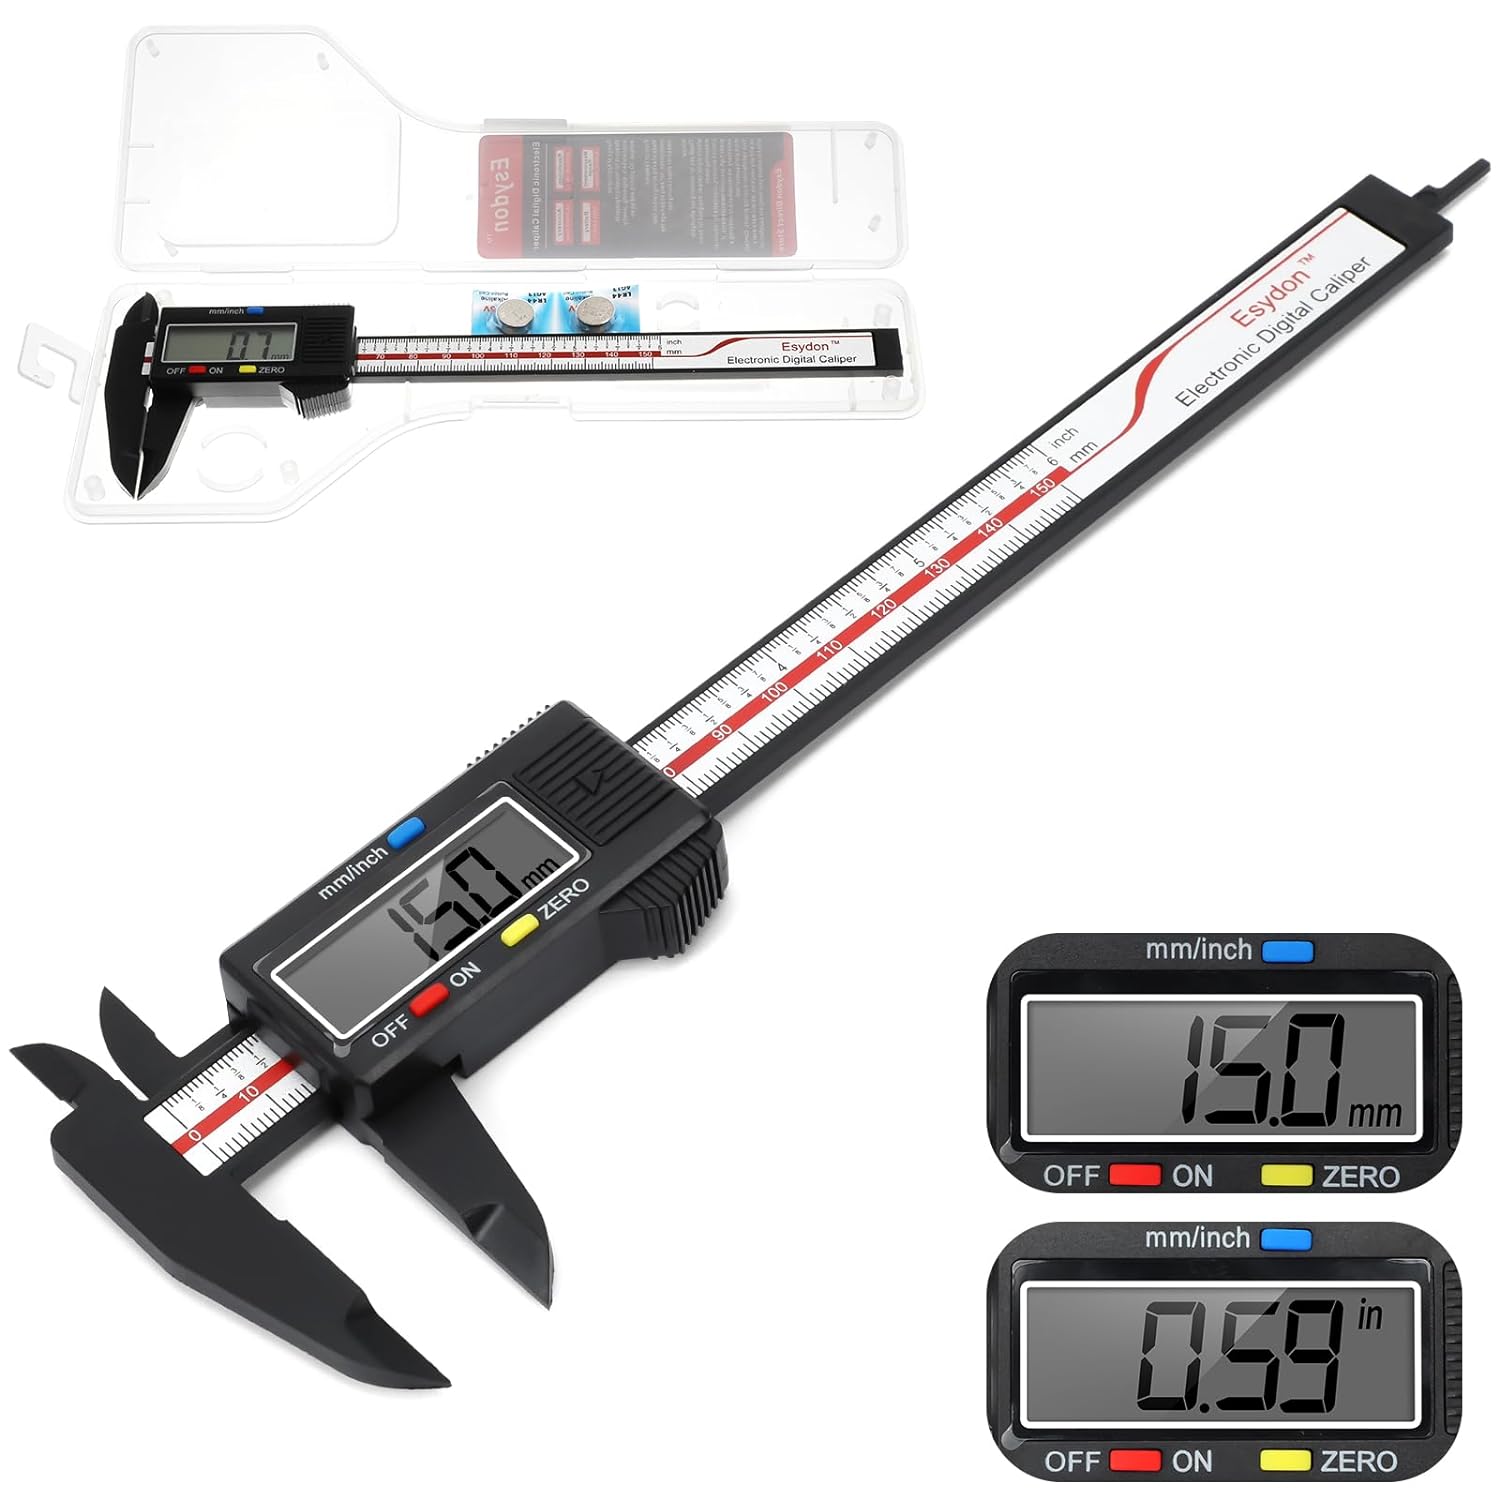 Digital Caliper, Esydon Upgraded Calipers 6 inch, Measuring Tool, Electronic Ruler, with Large LCD Screen, Auto-Off Feature, Inch and Millimeter Conversion, Plastic Case, Perfect for Household, DIY